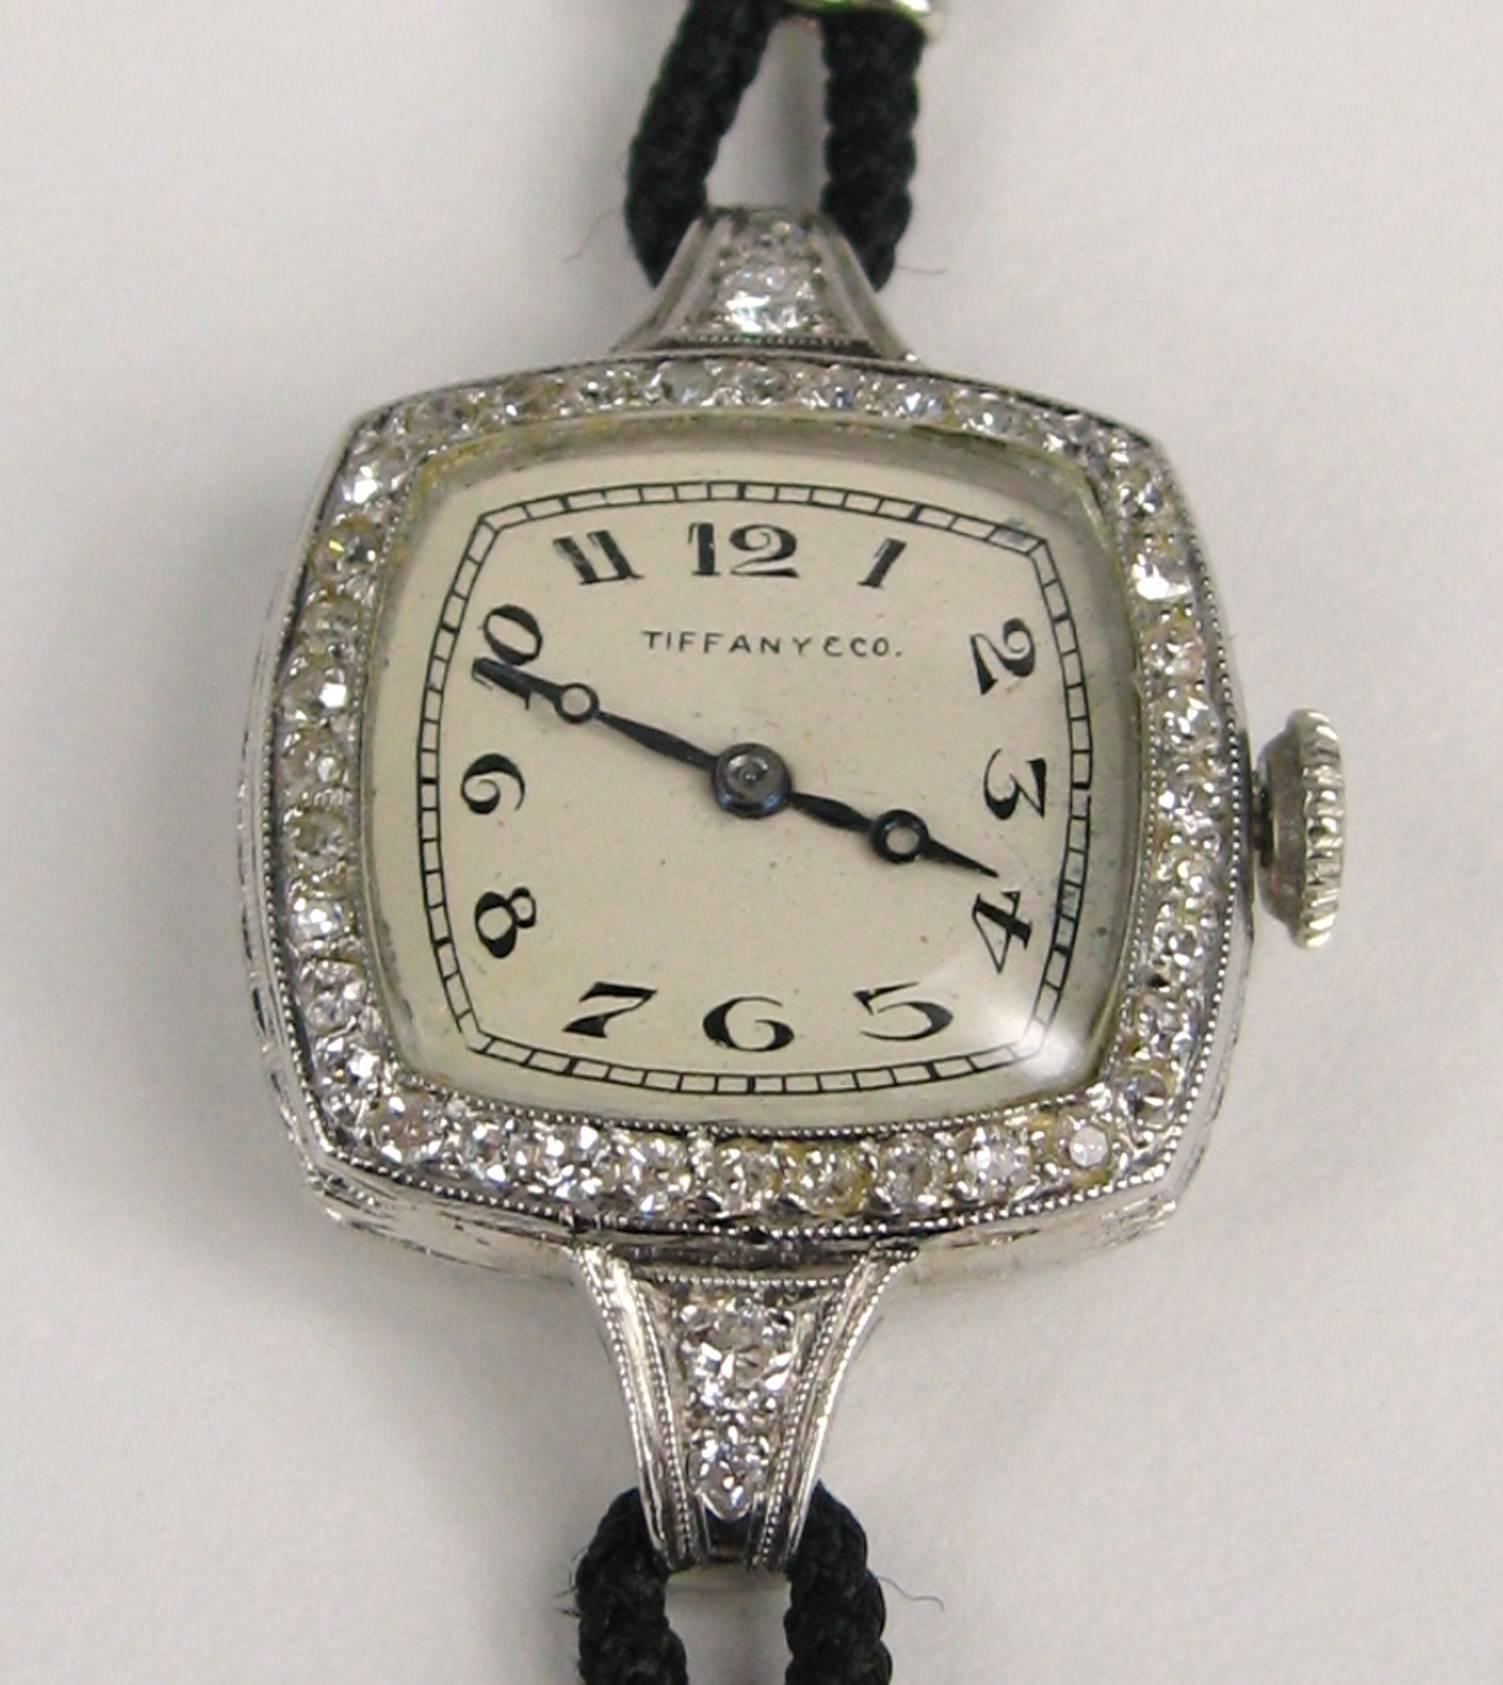 Stunning Platinum Tiffany watch Audemars, Pigute & Co
Face surrounded by Bezel set small diamonds 
Black cloth band
14K white Gold end caps 
Watch is working 
Measuring 
1.17